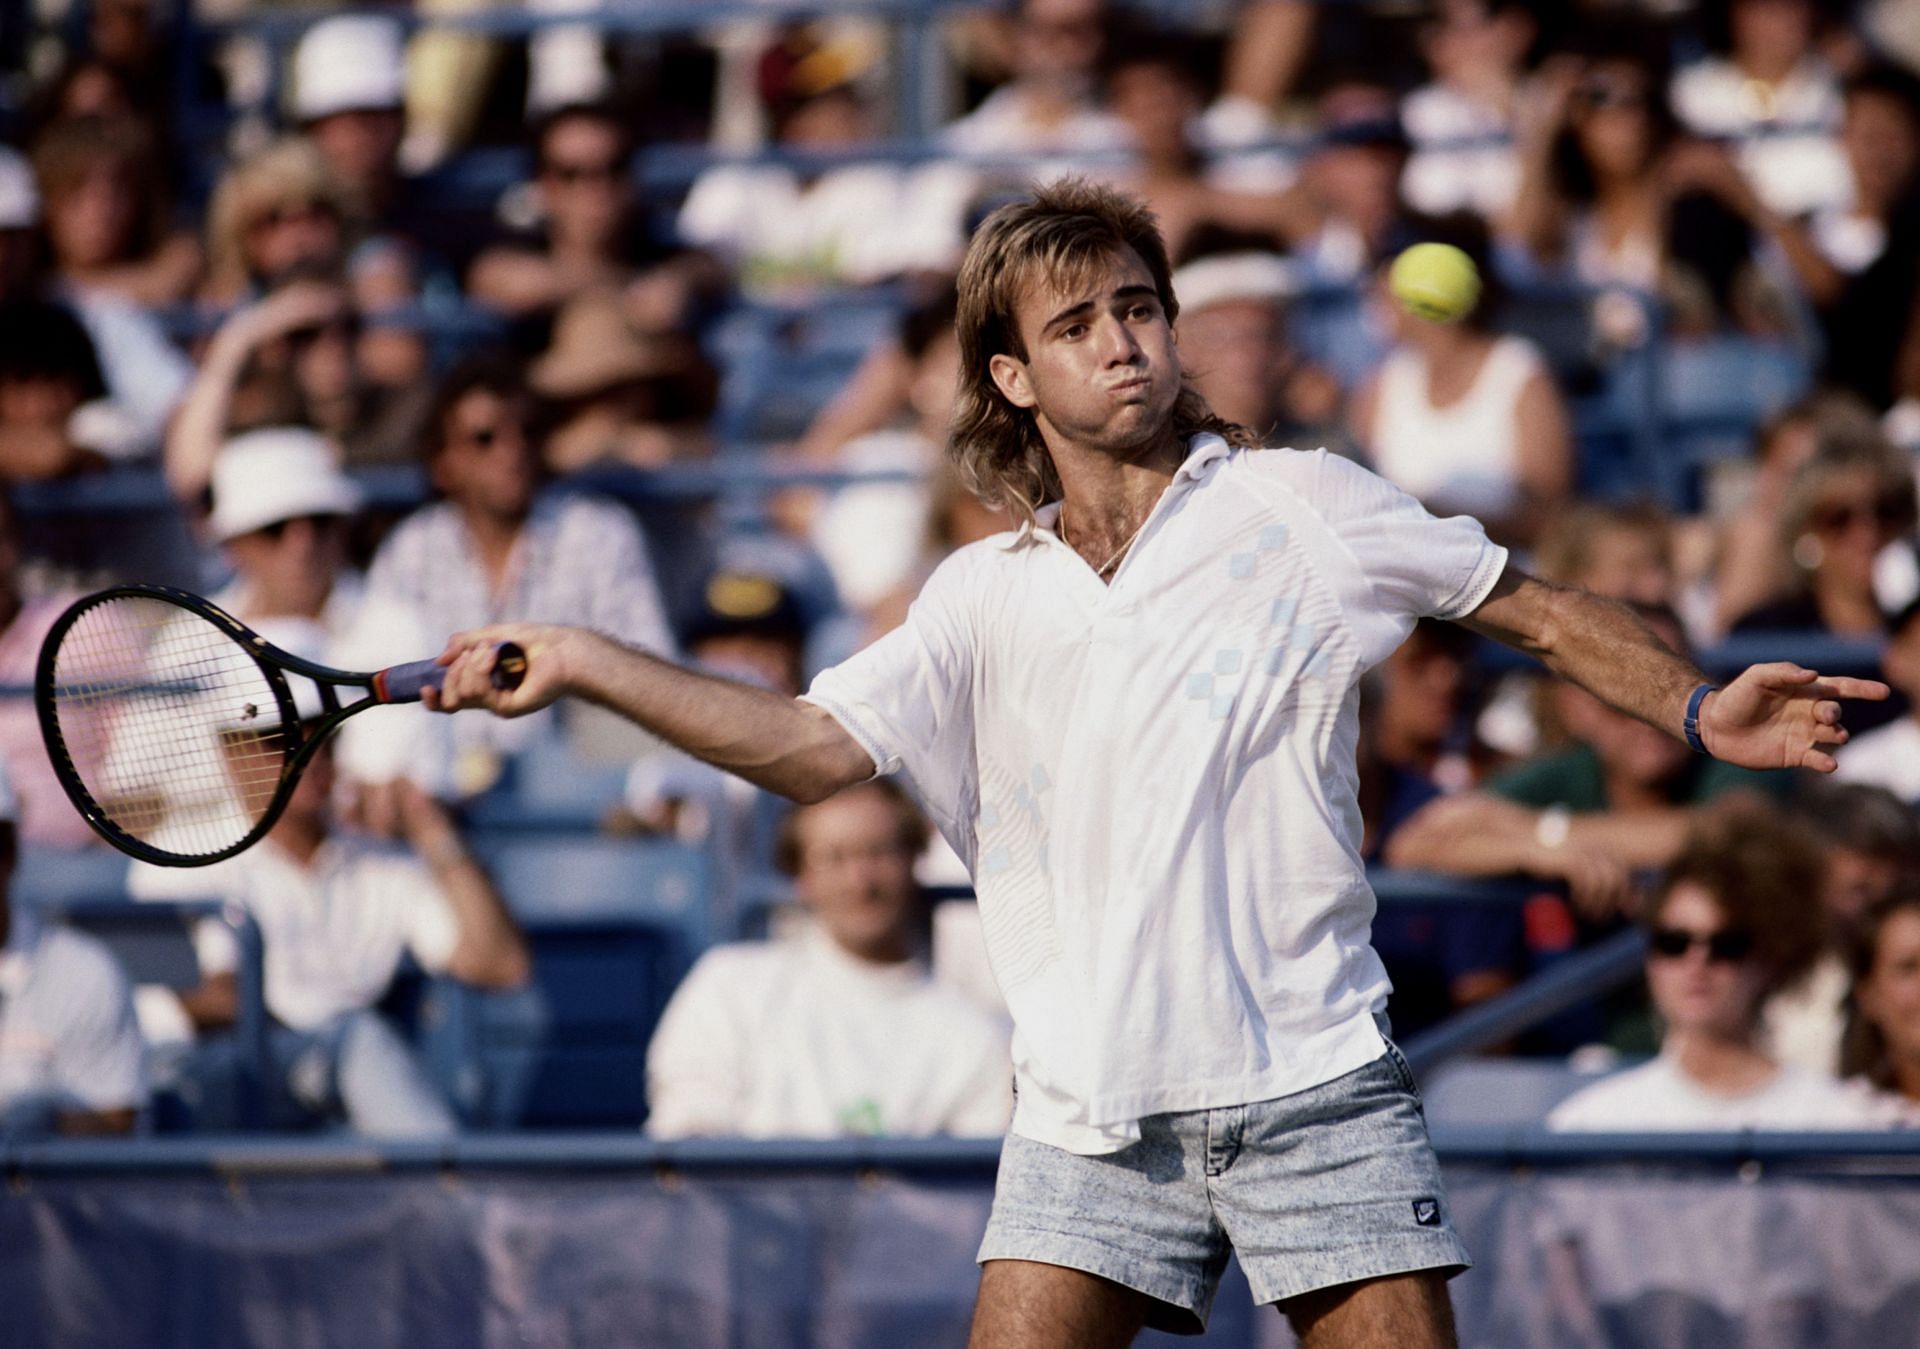 Andre Agassi at the 1988 US Open